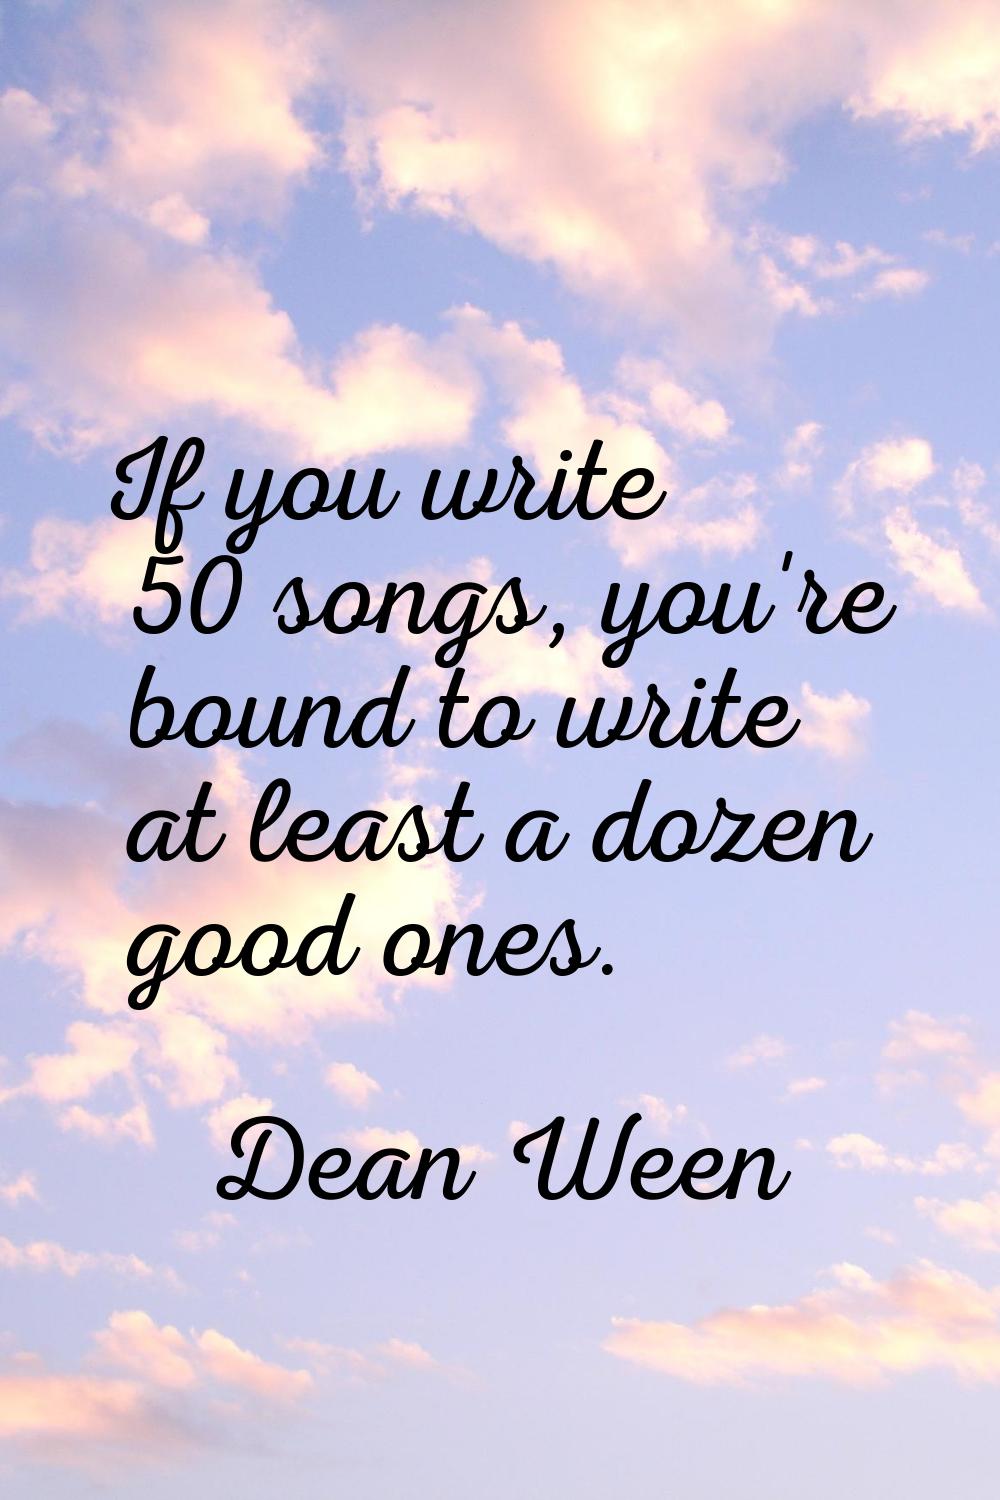 If you write 50 songs, you're bound to write at least a dozen good ones.